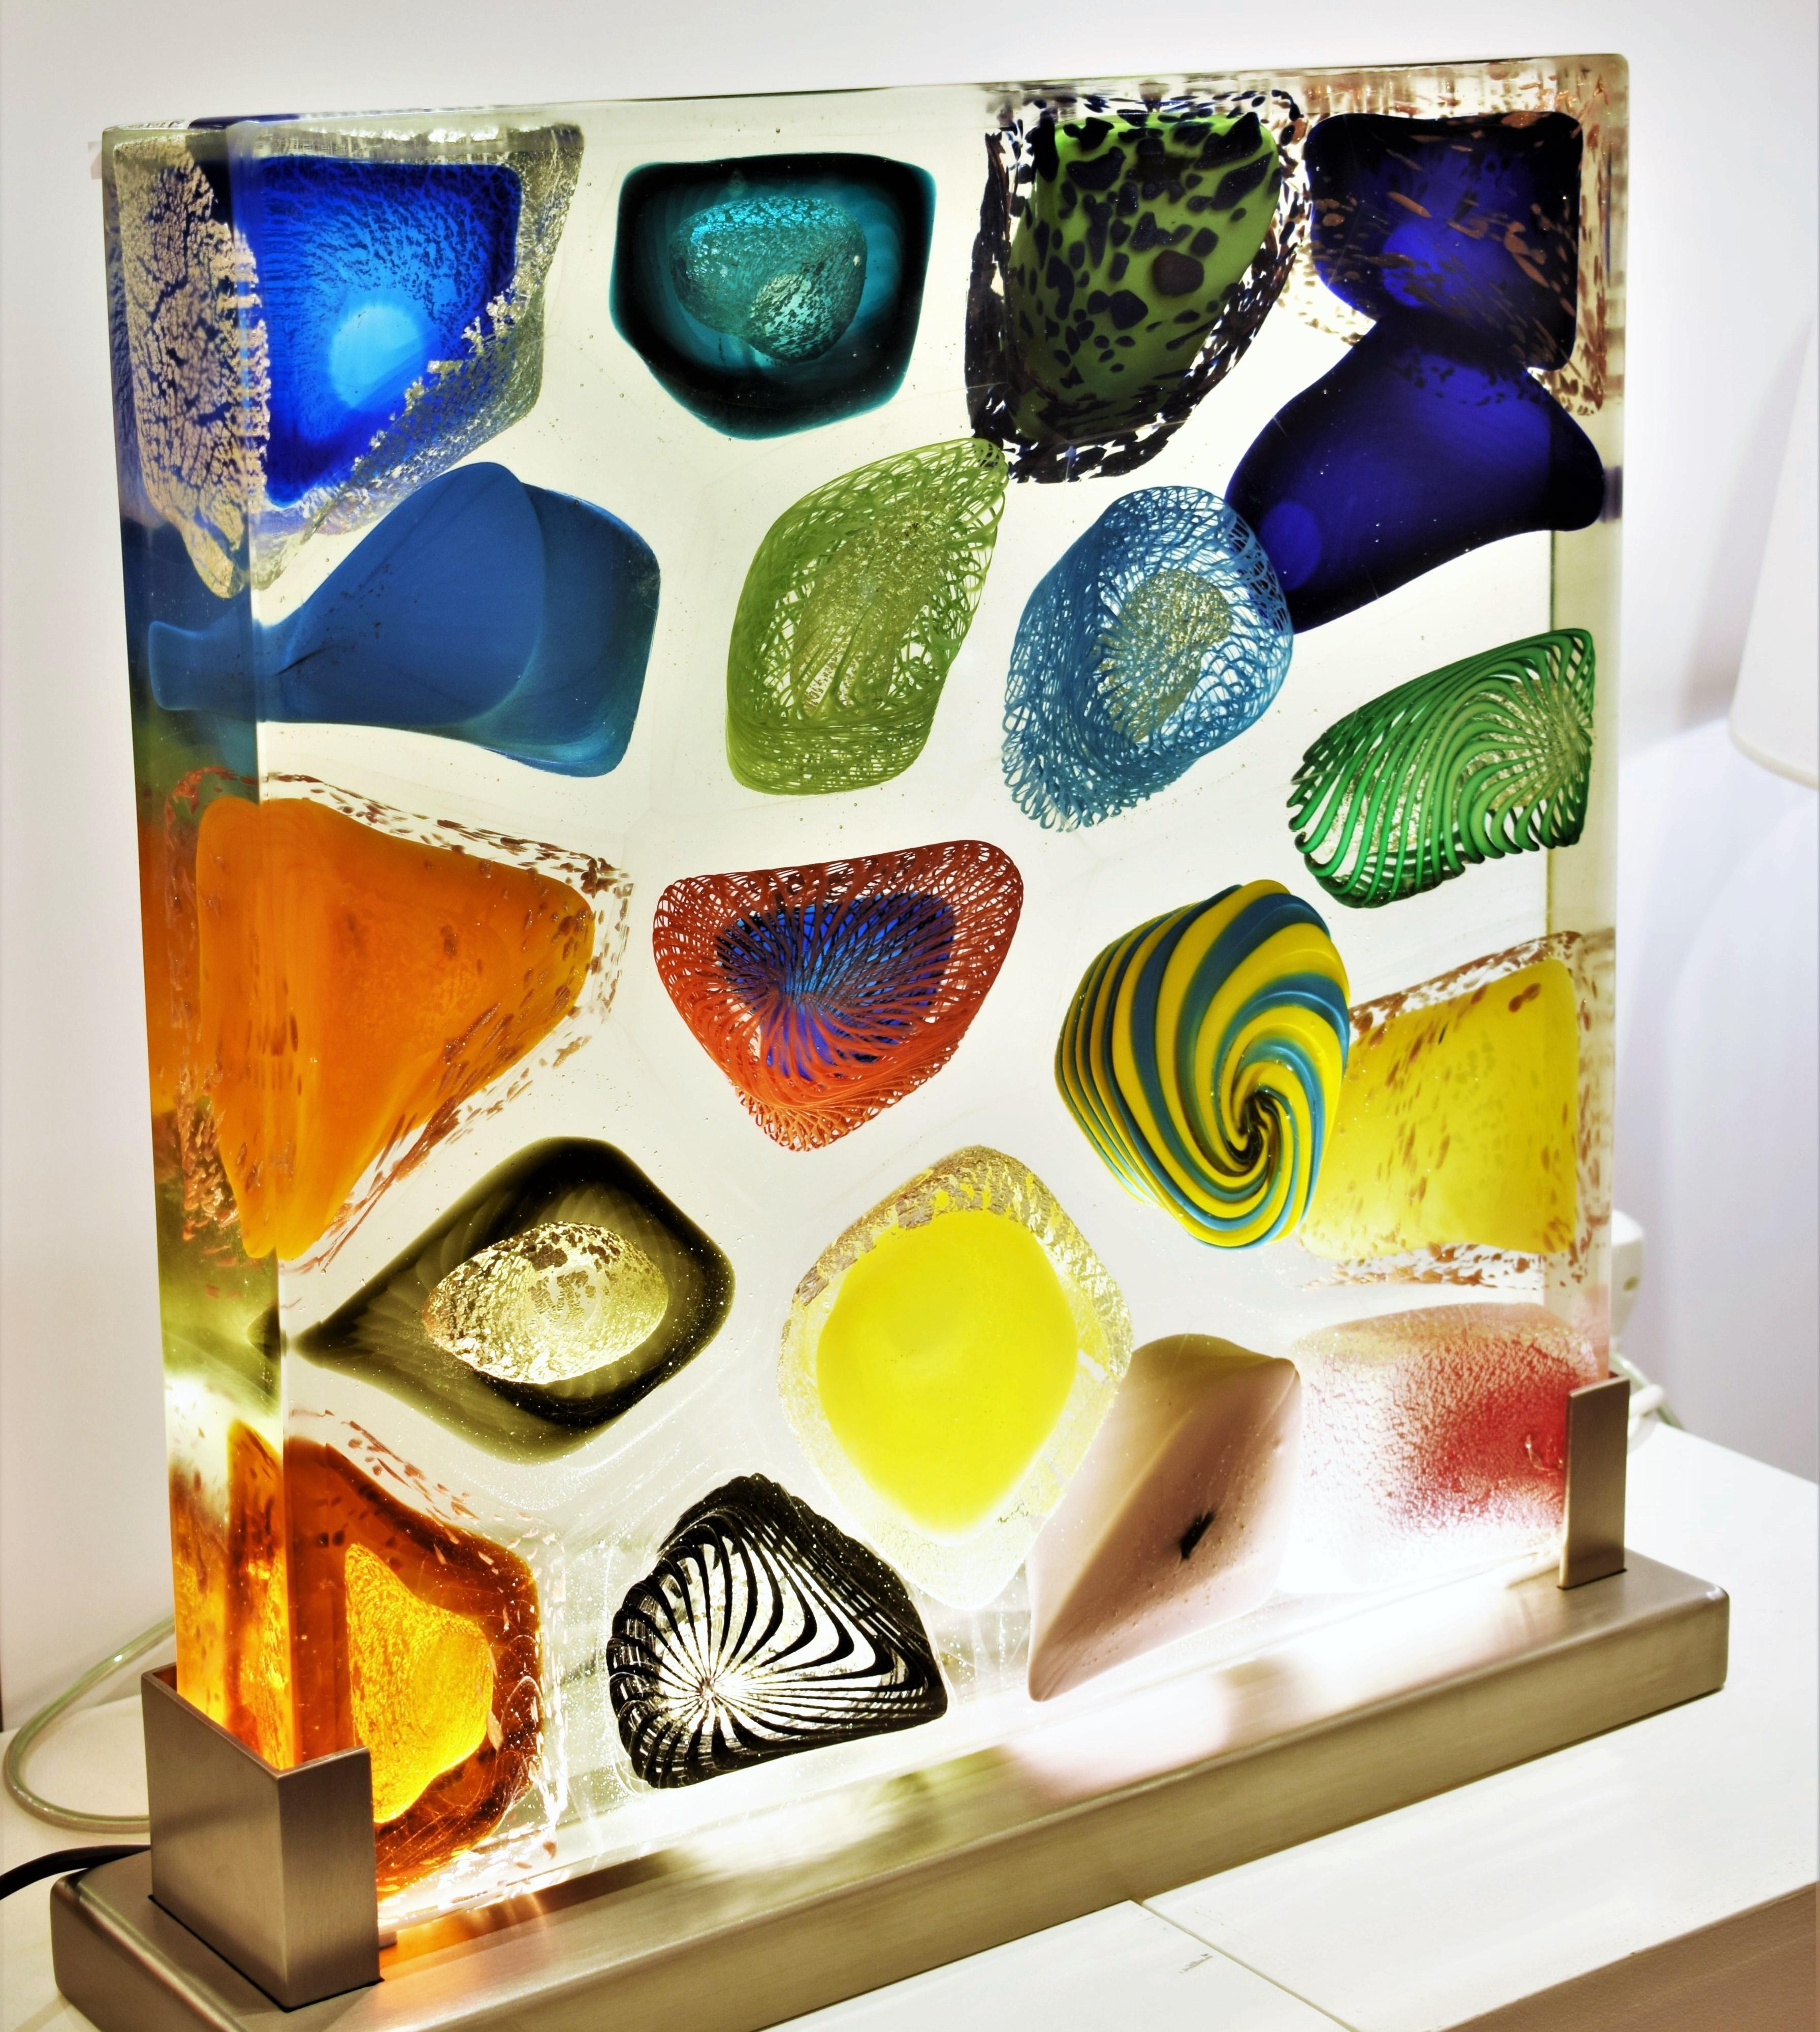 Luminous monolith in murano artistic glass. The murano artistic glass sculpture is a creative and natural expression of the artist Eros Raffael, made with transparent and pastel glass canes, silver, pure gold, gold aventurine, zanfirico, filigree